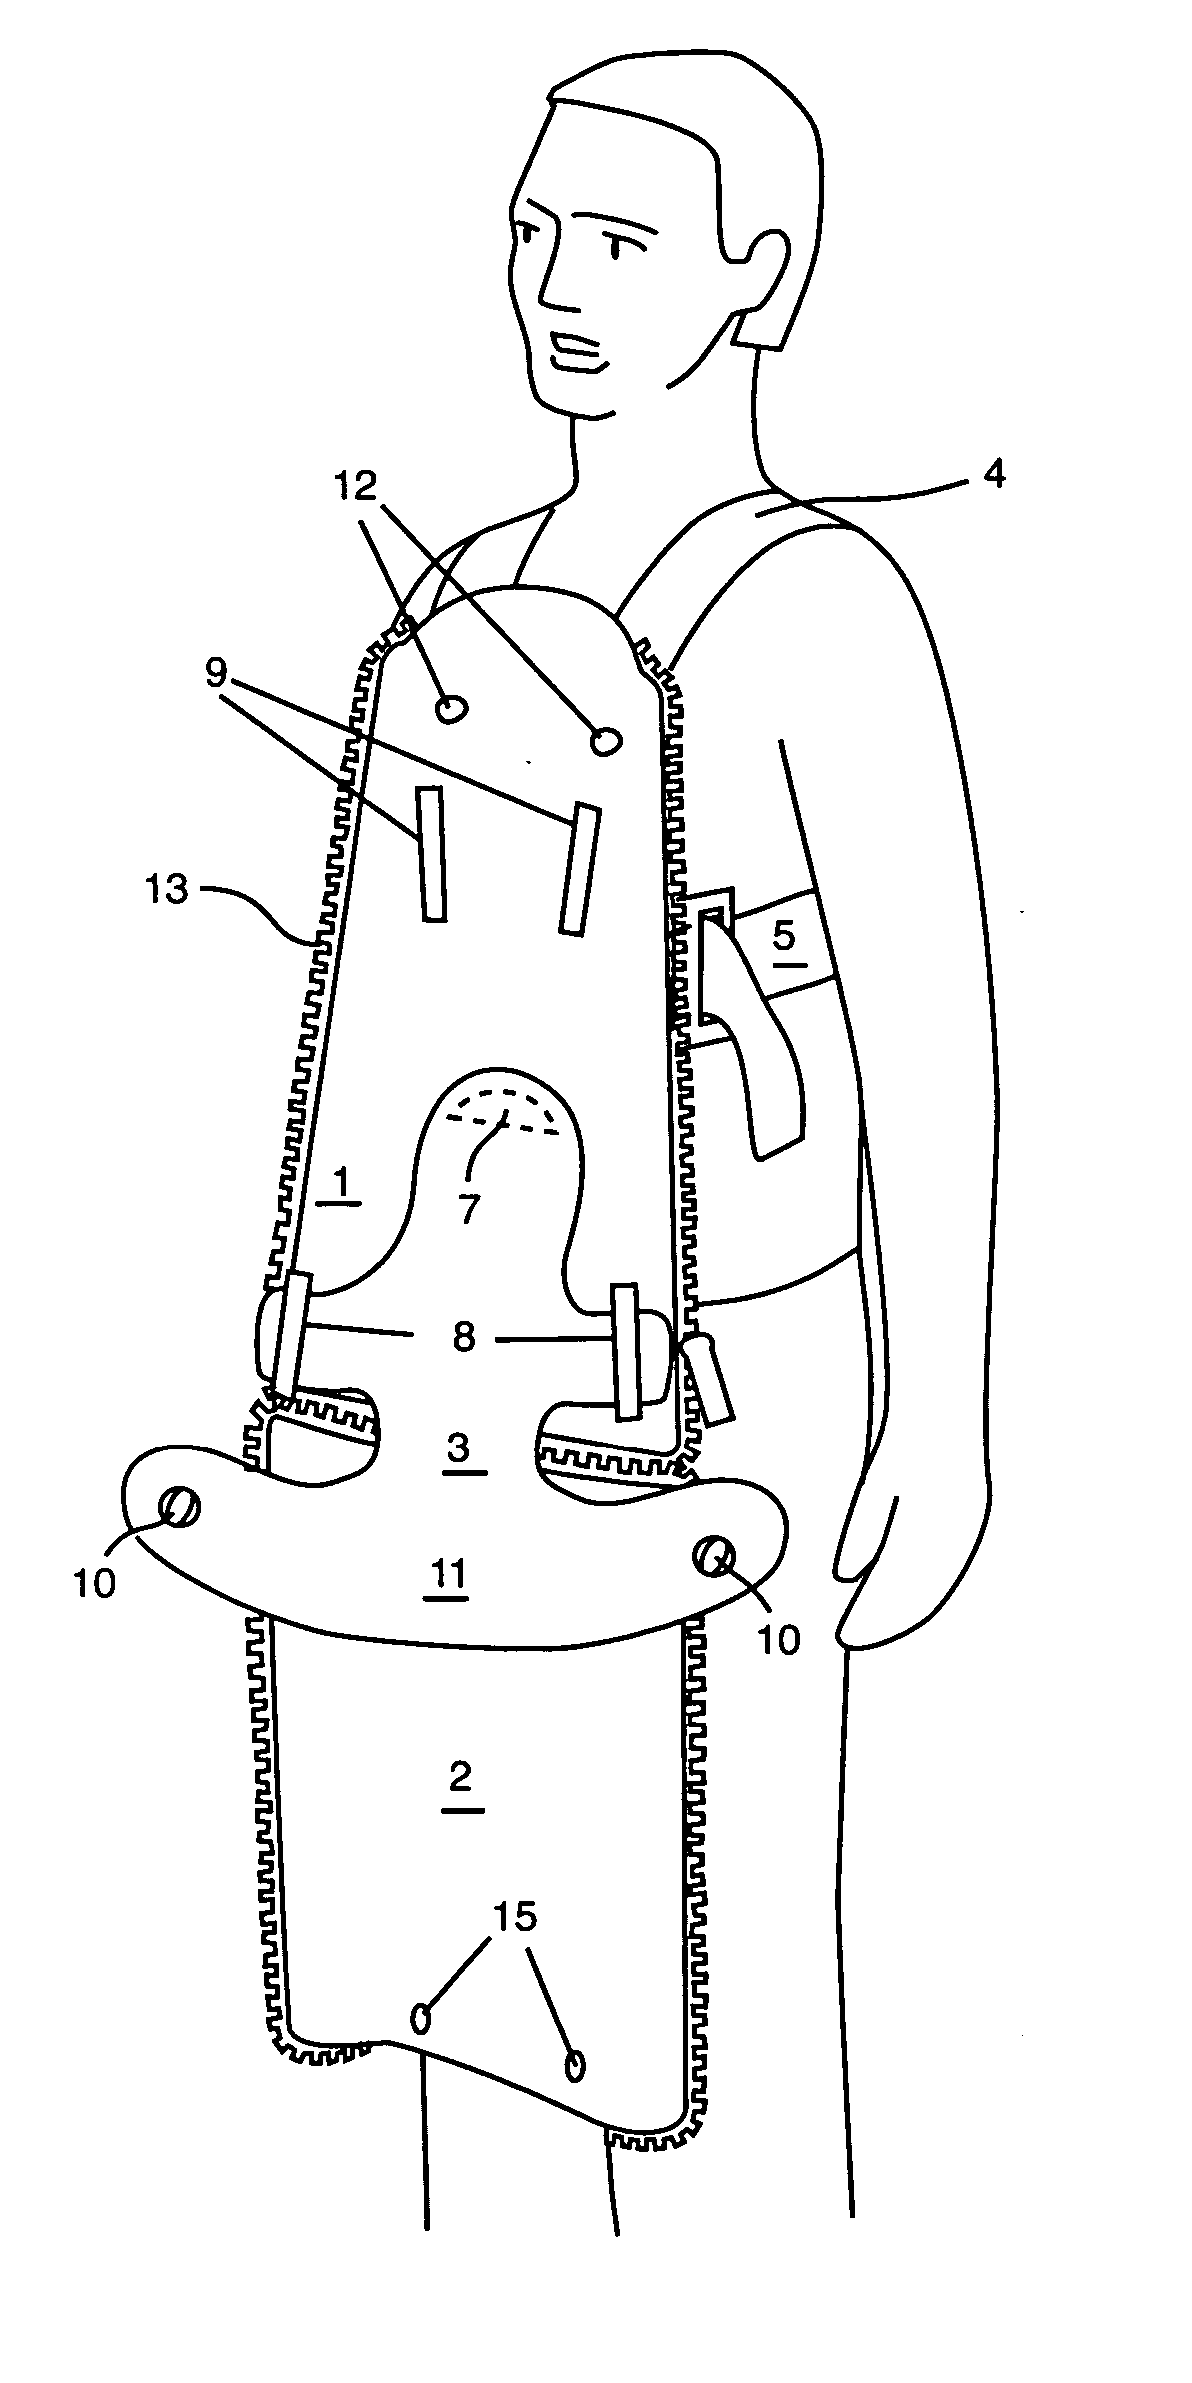 Baby carrier with enclosure system